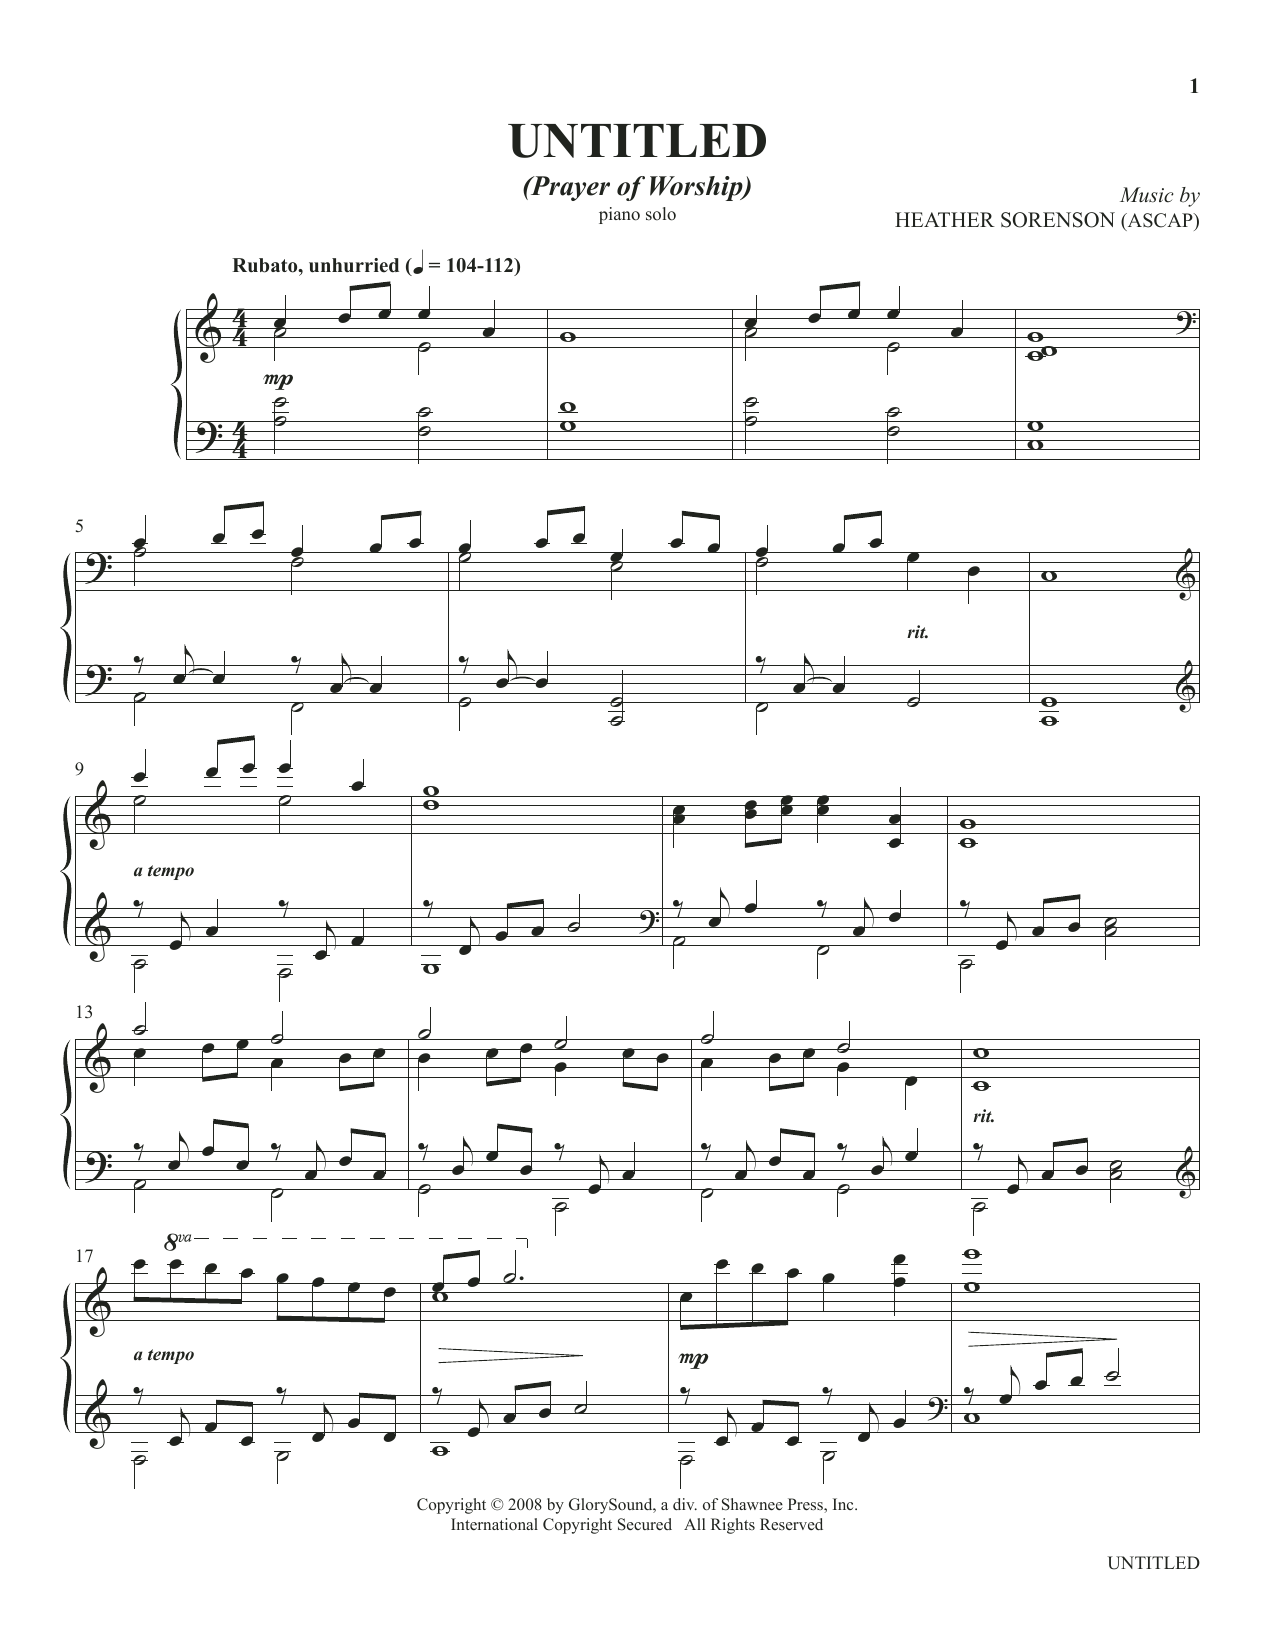 Download Heather Sorenson Untitled (from The Prayer Project) Sheet Music